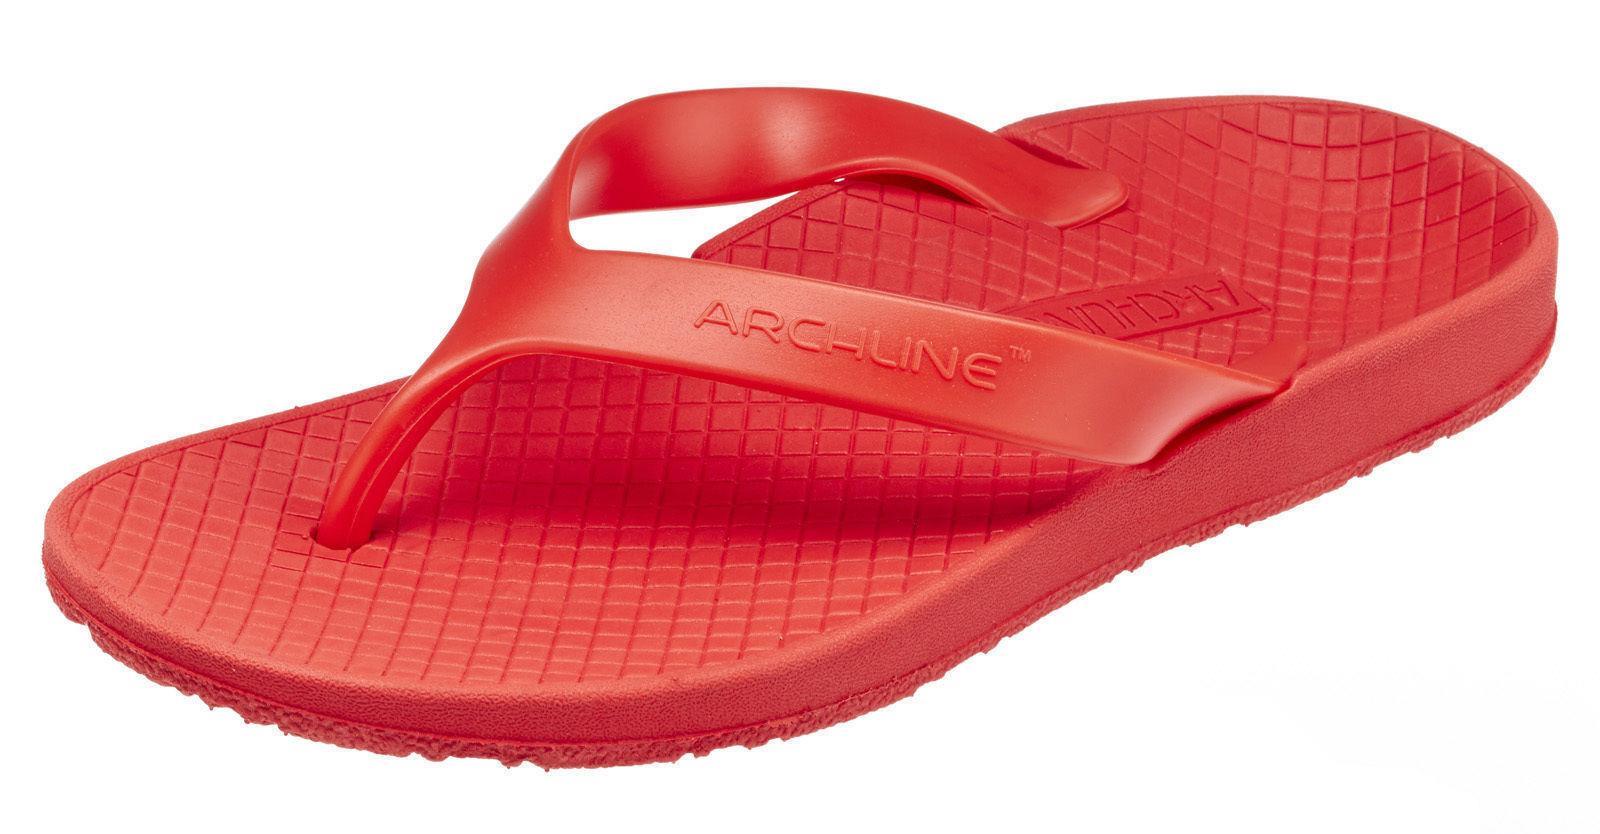 ARCHLINE Orthotic Thongs Arch Support Shoes Footwear Flip Flops Orthopedic - Red/Red - EUR 43